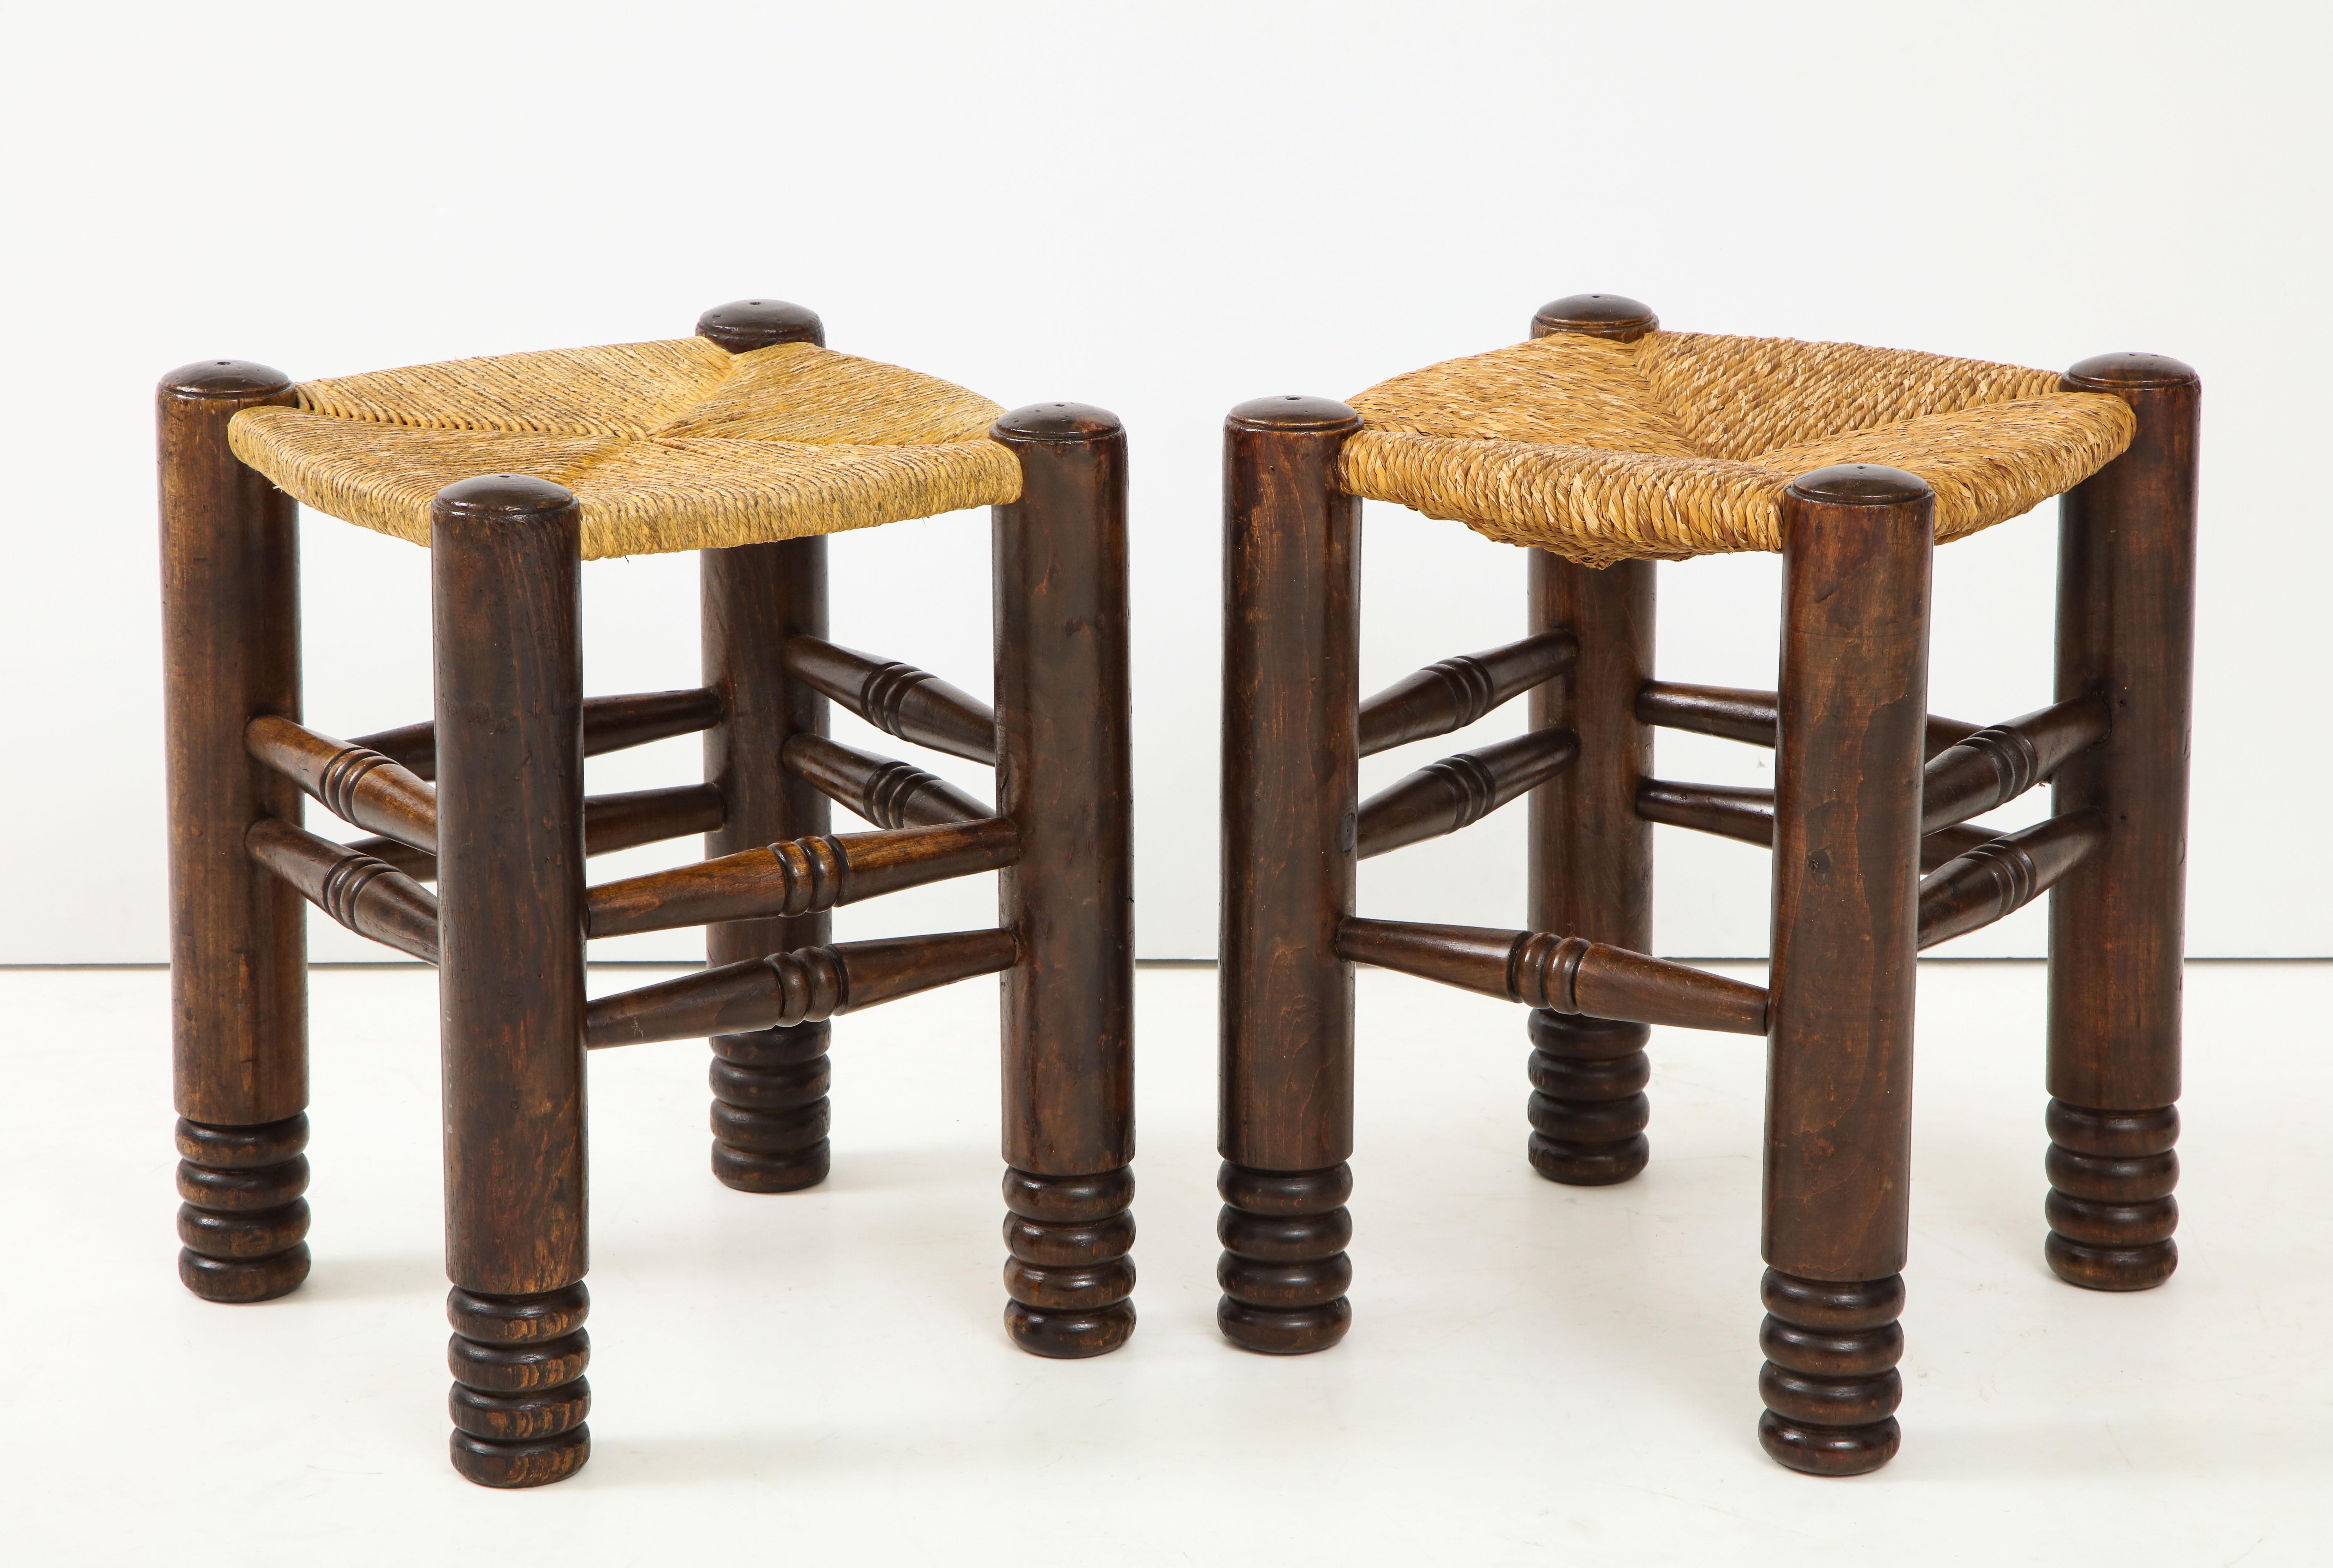 These rustic oak and straw stools designed by Charles Dudouyt in the 1930s are composed of 4 cylindrical solid oak legs linked by sleepers and a square braided straw seat. In excellent vintage condition, they have developed a beautiful patina over